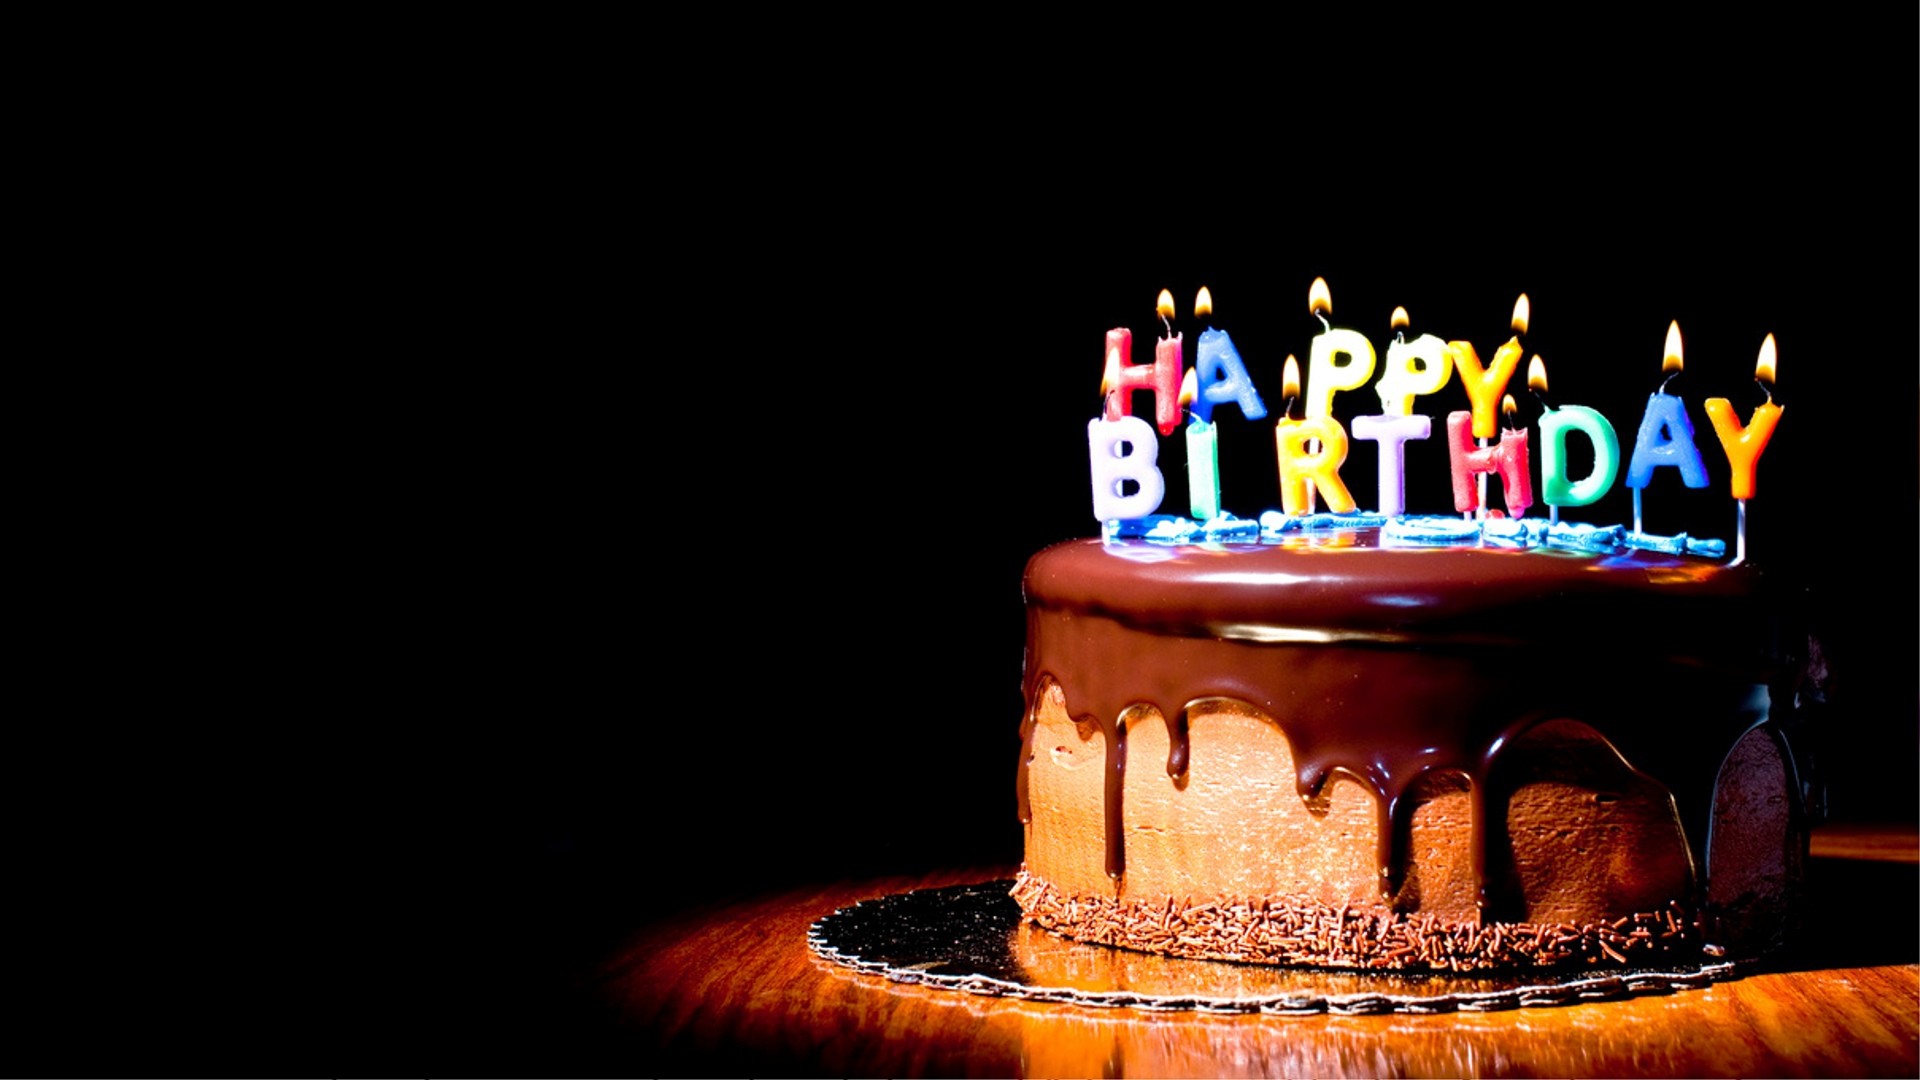 Birthday Cake Desktop Backgrounds HD With high-resolution 1920X1080 pixel. You can use this wallpaper for your Windows and Mac OS computers as well as your Android and iPhone smartphones